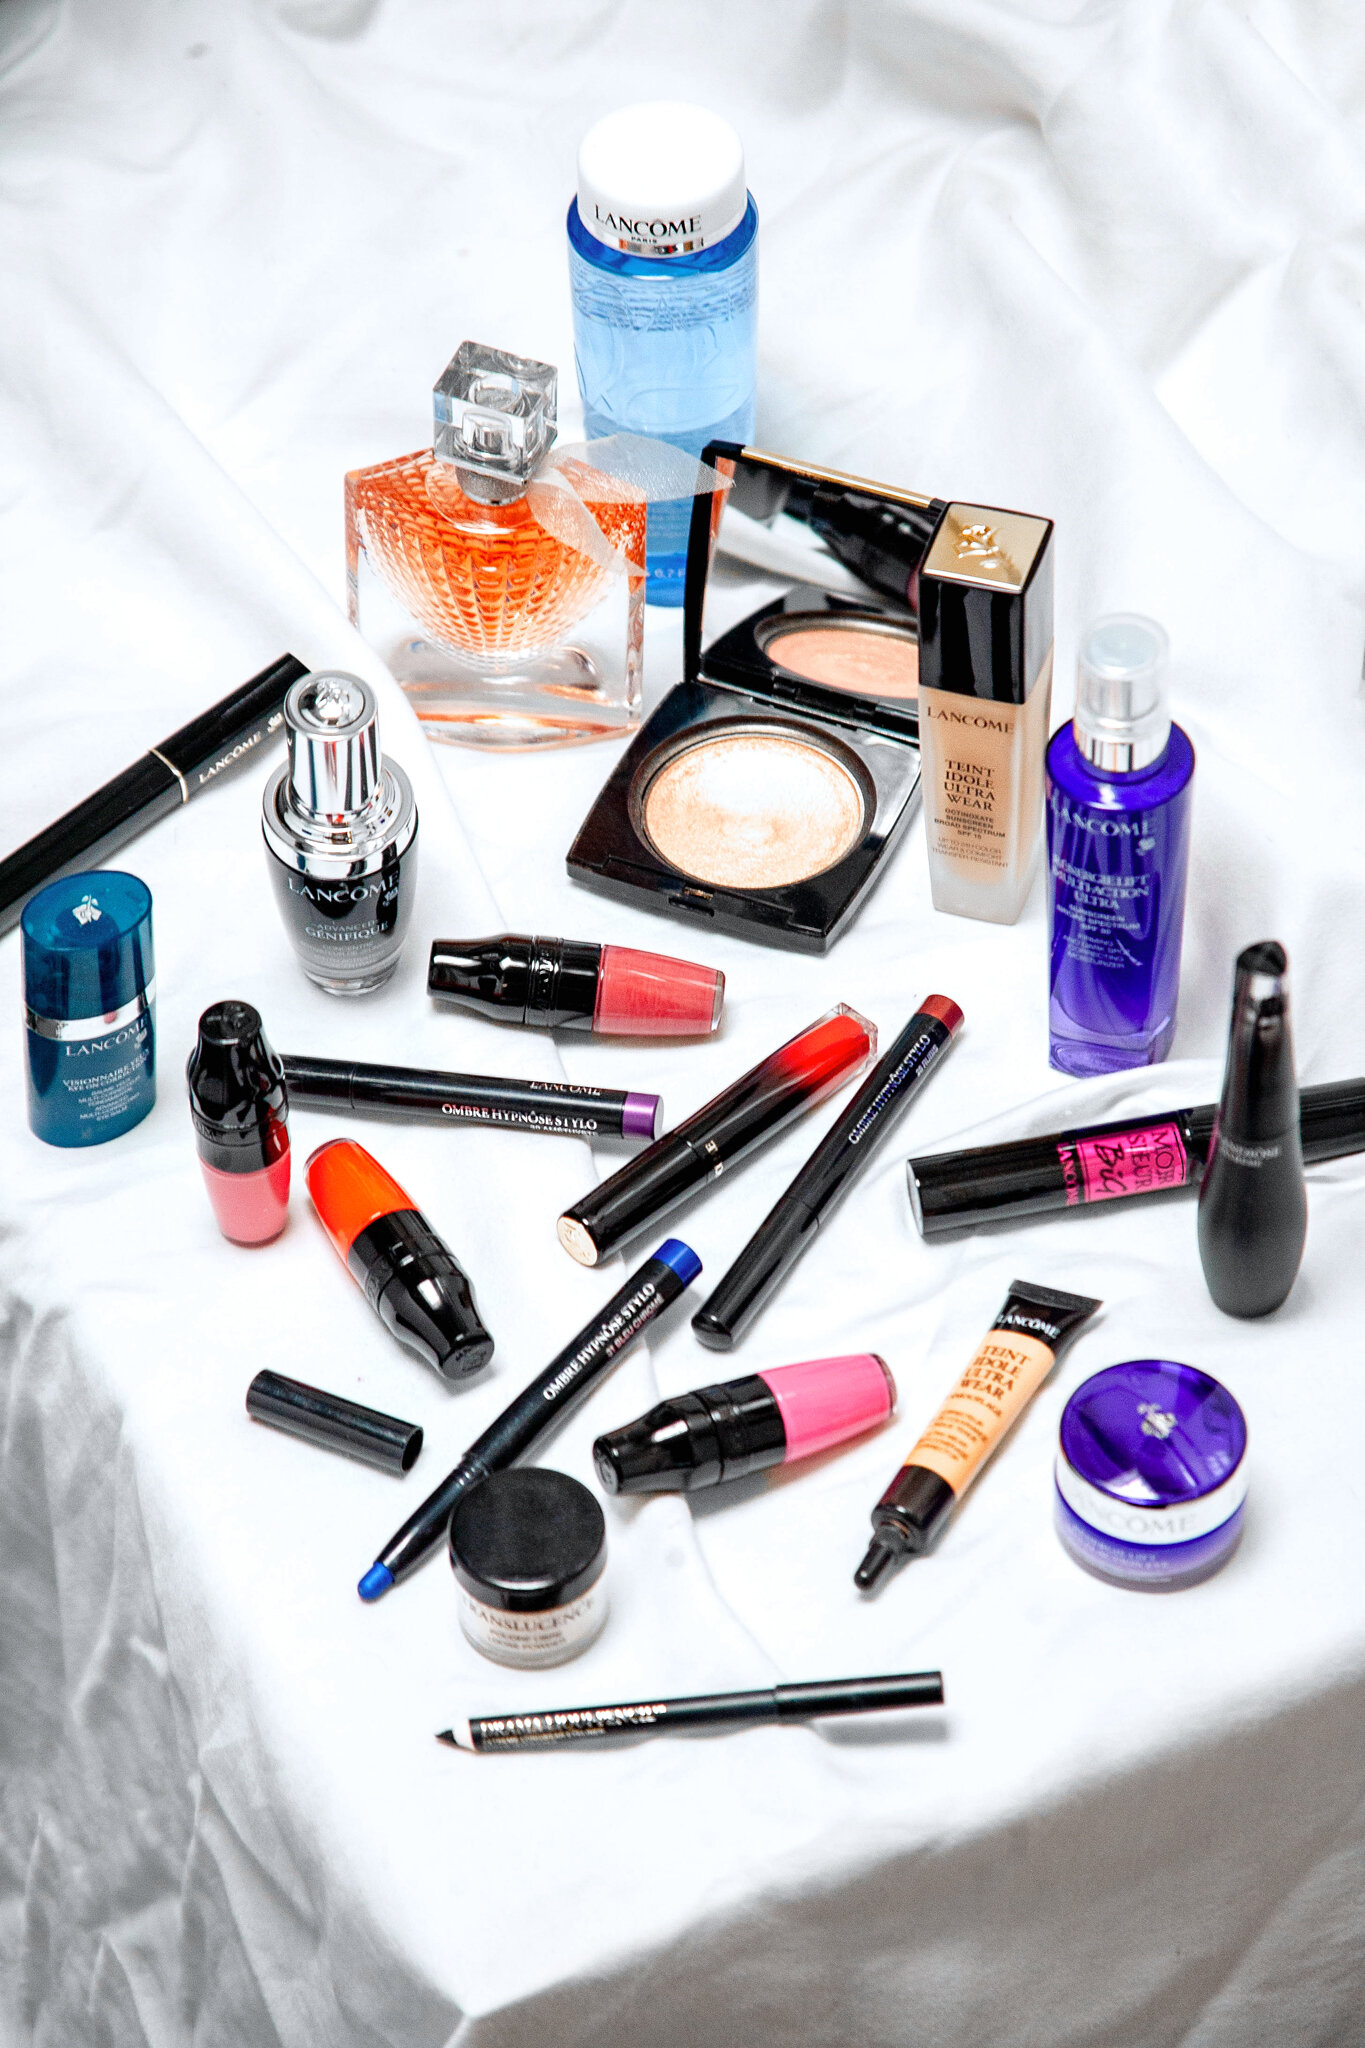 Lancome makeup products